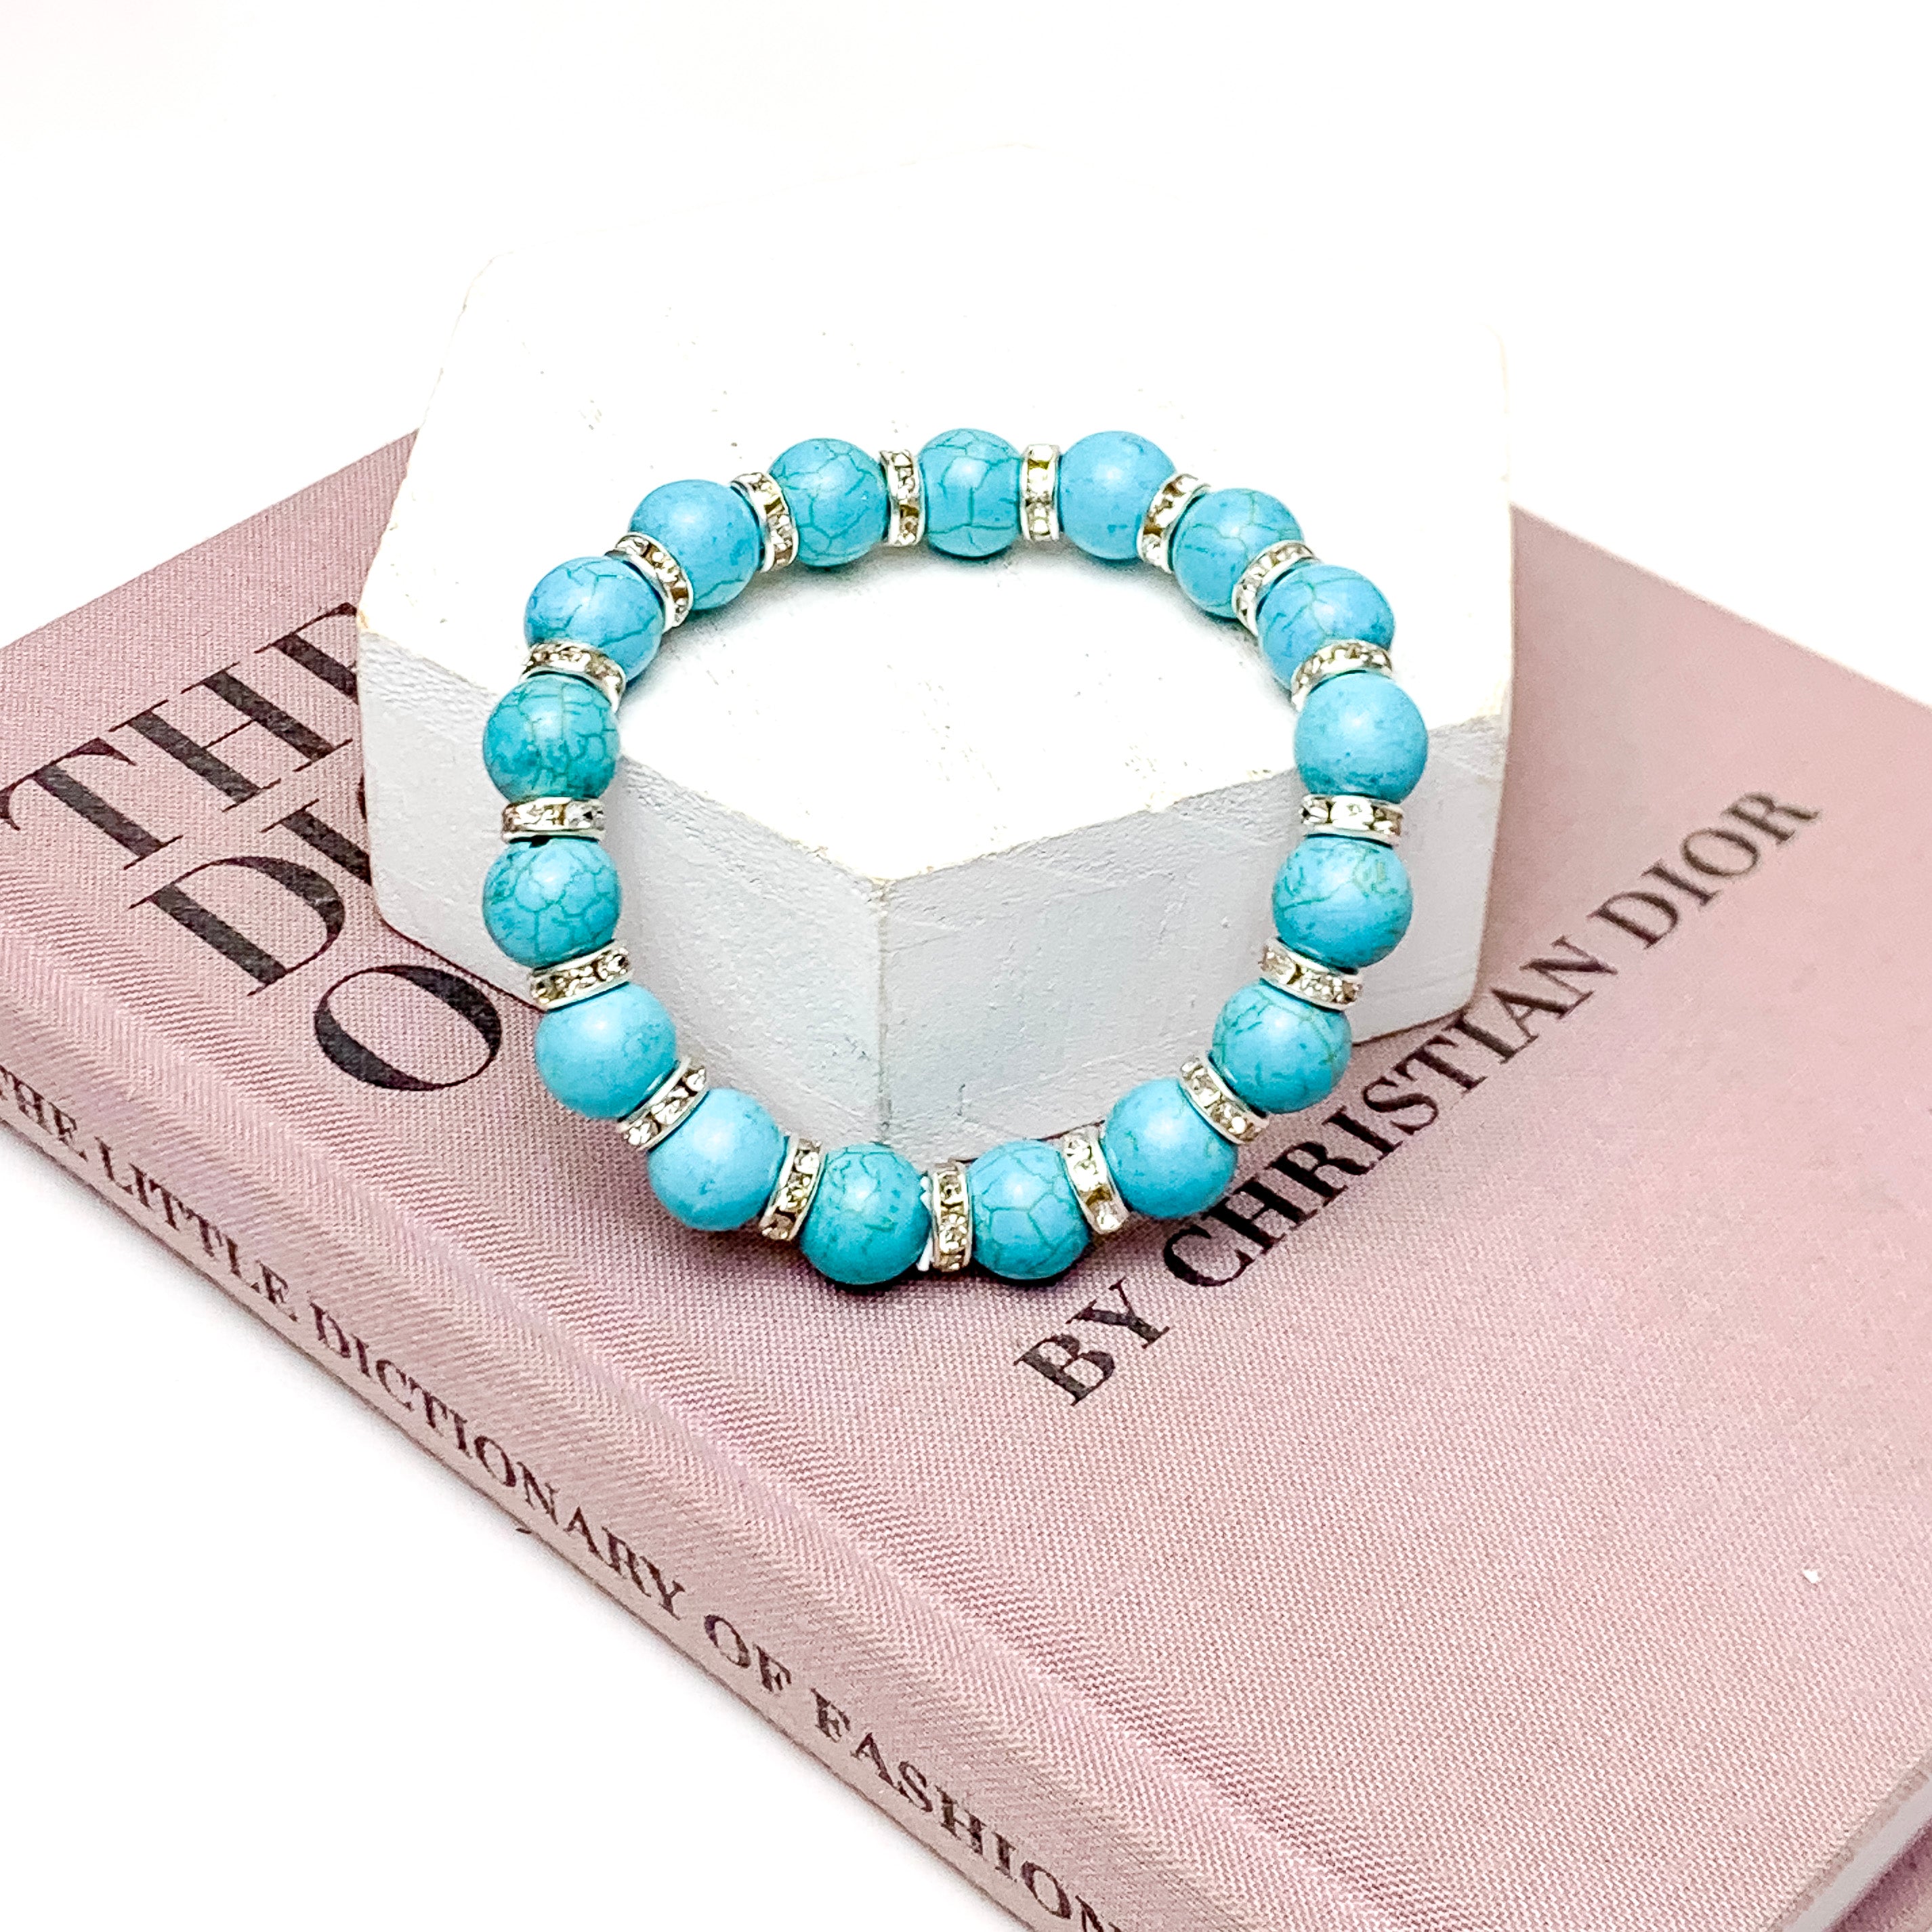 Faux Turquoise Beaded Bracelet with Crystal Accented Spacers - Giddy Up Glamour Boutique